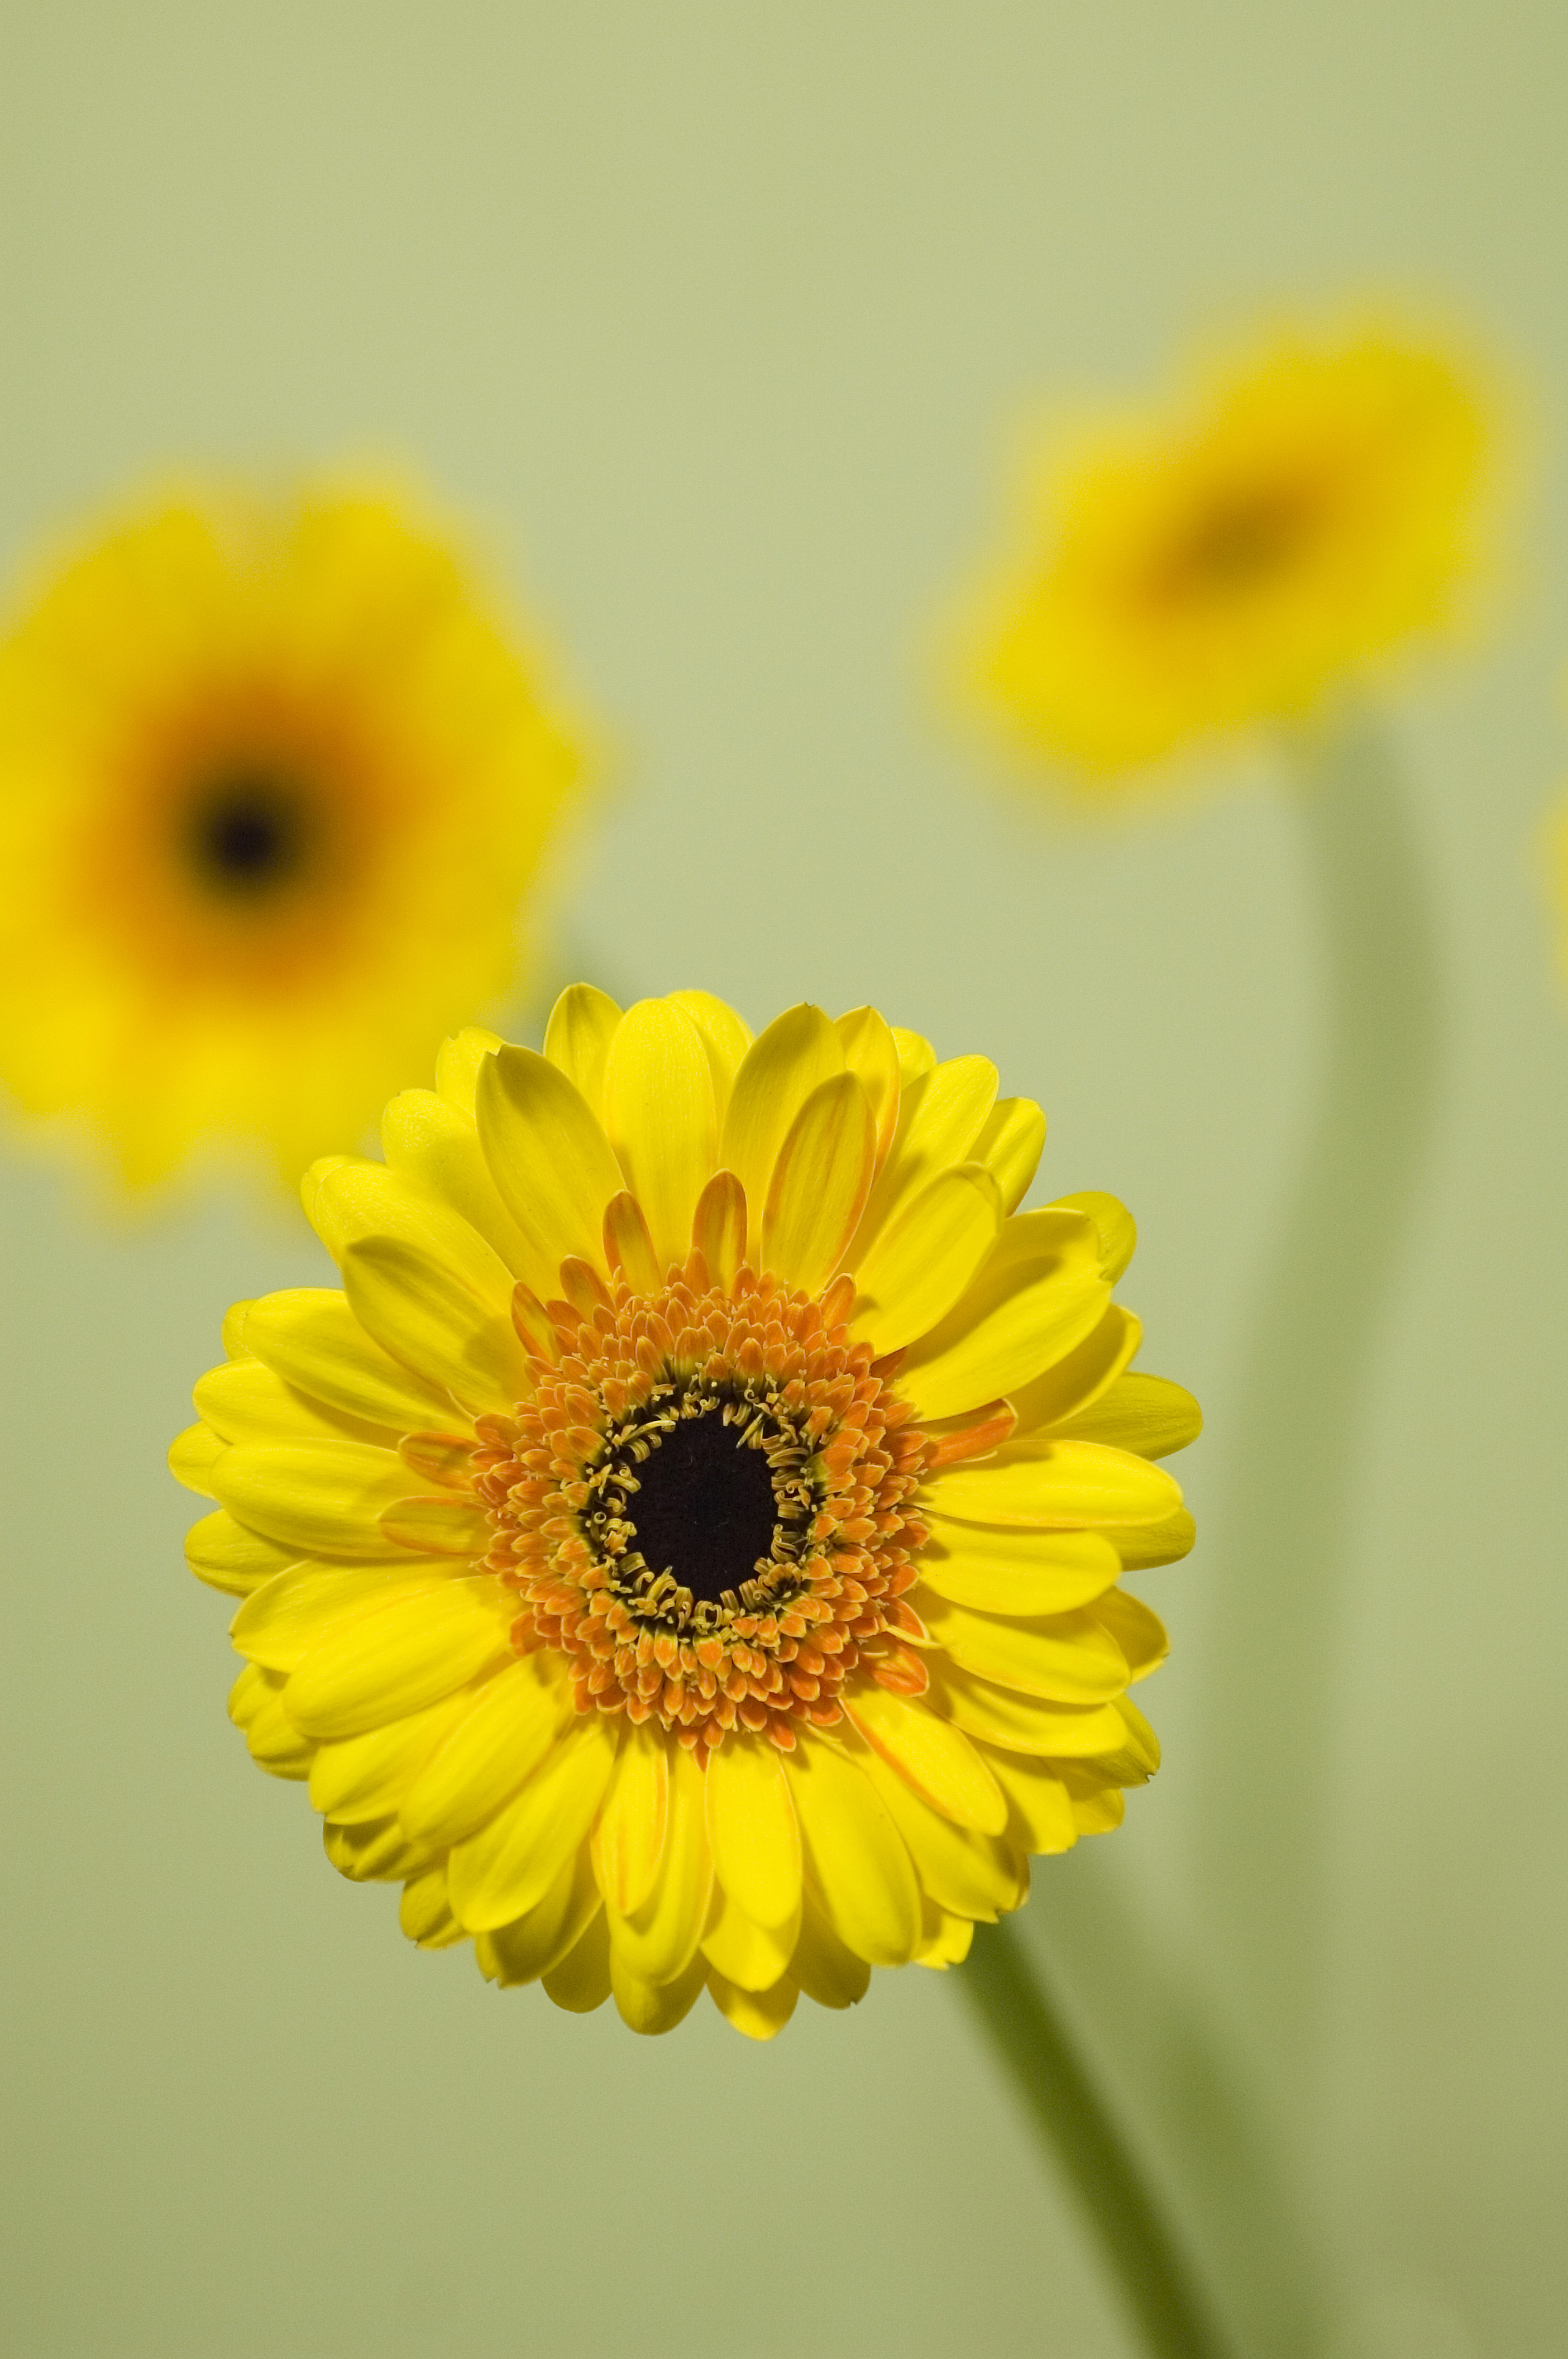 63554 download wallpaper flowers, yellow, flower, close-up, bloom, flowering, gerbera screensavers and pictures for free